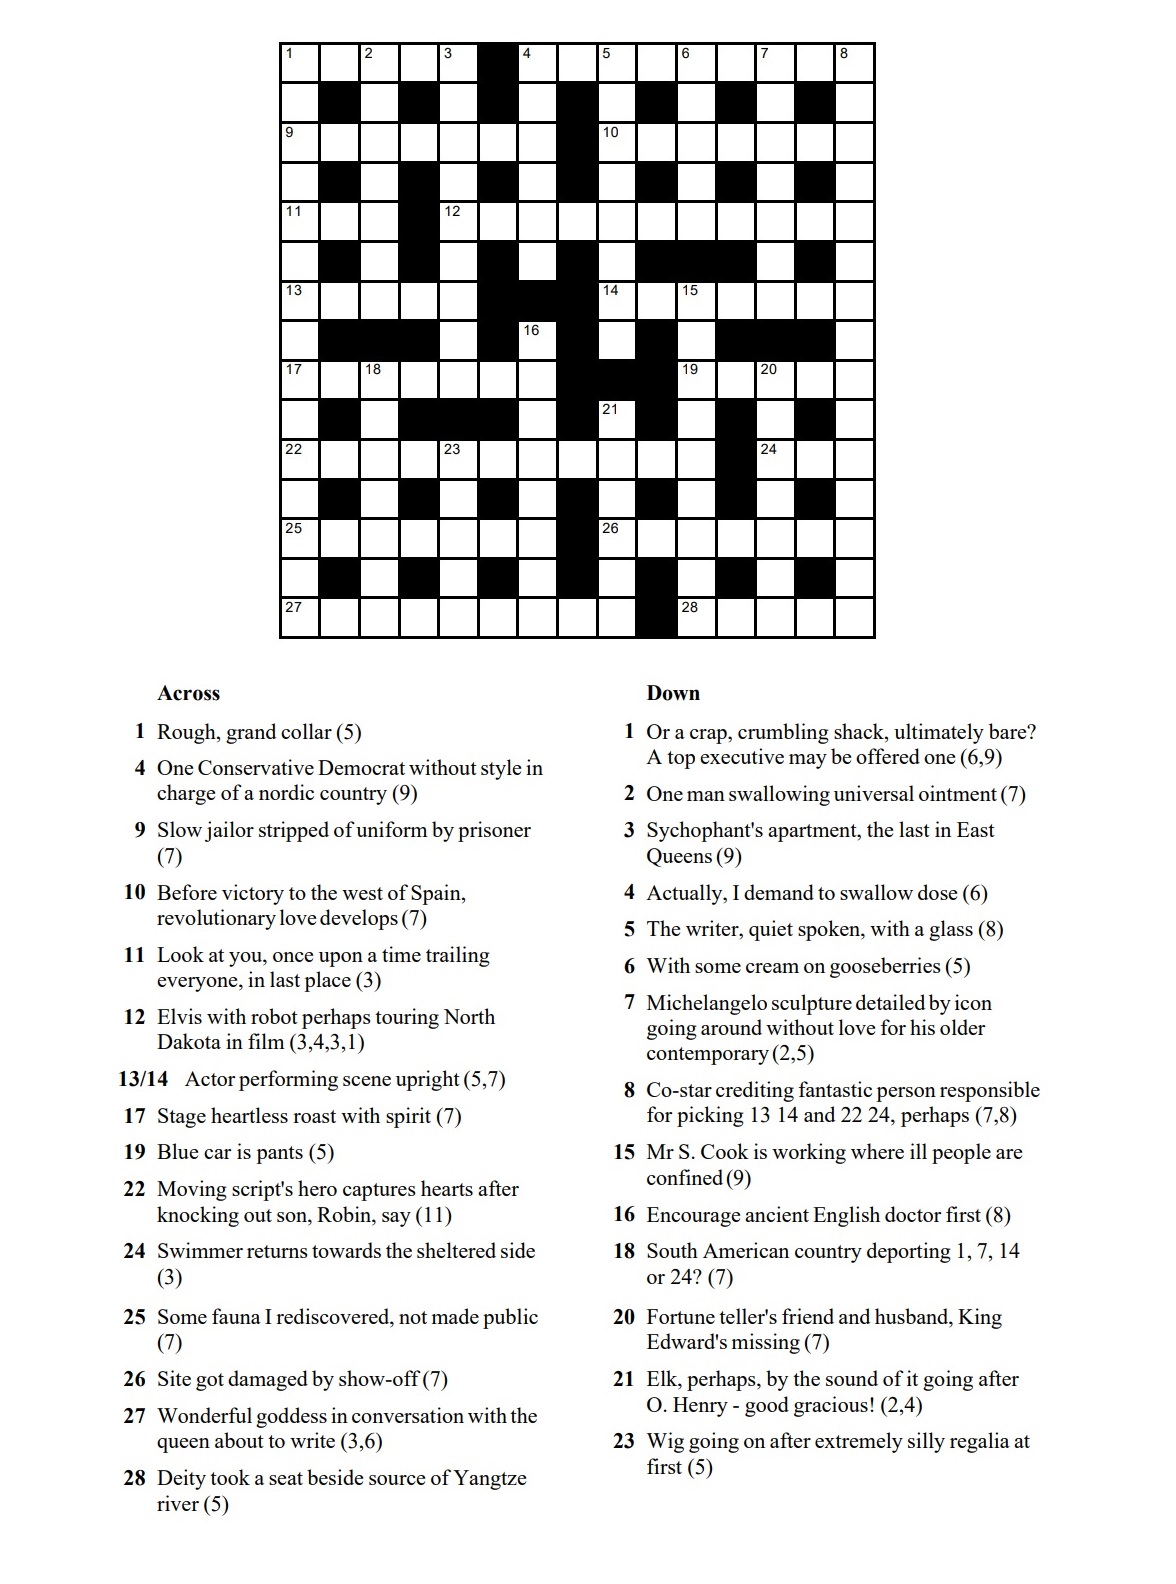 commoner-crosswords-free-cryptic-crosswords-and-cryptic-quizzes-by